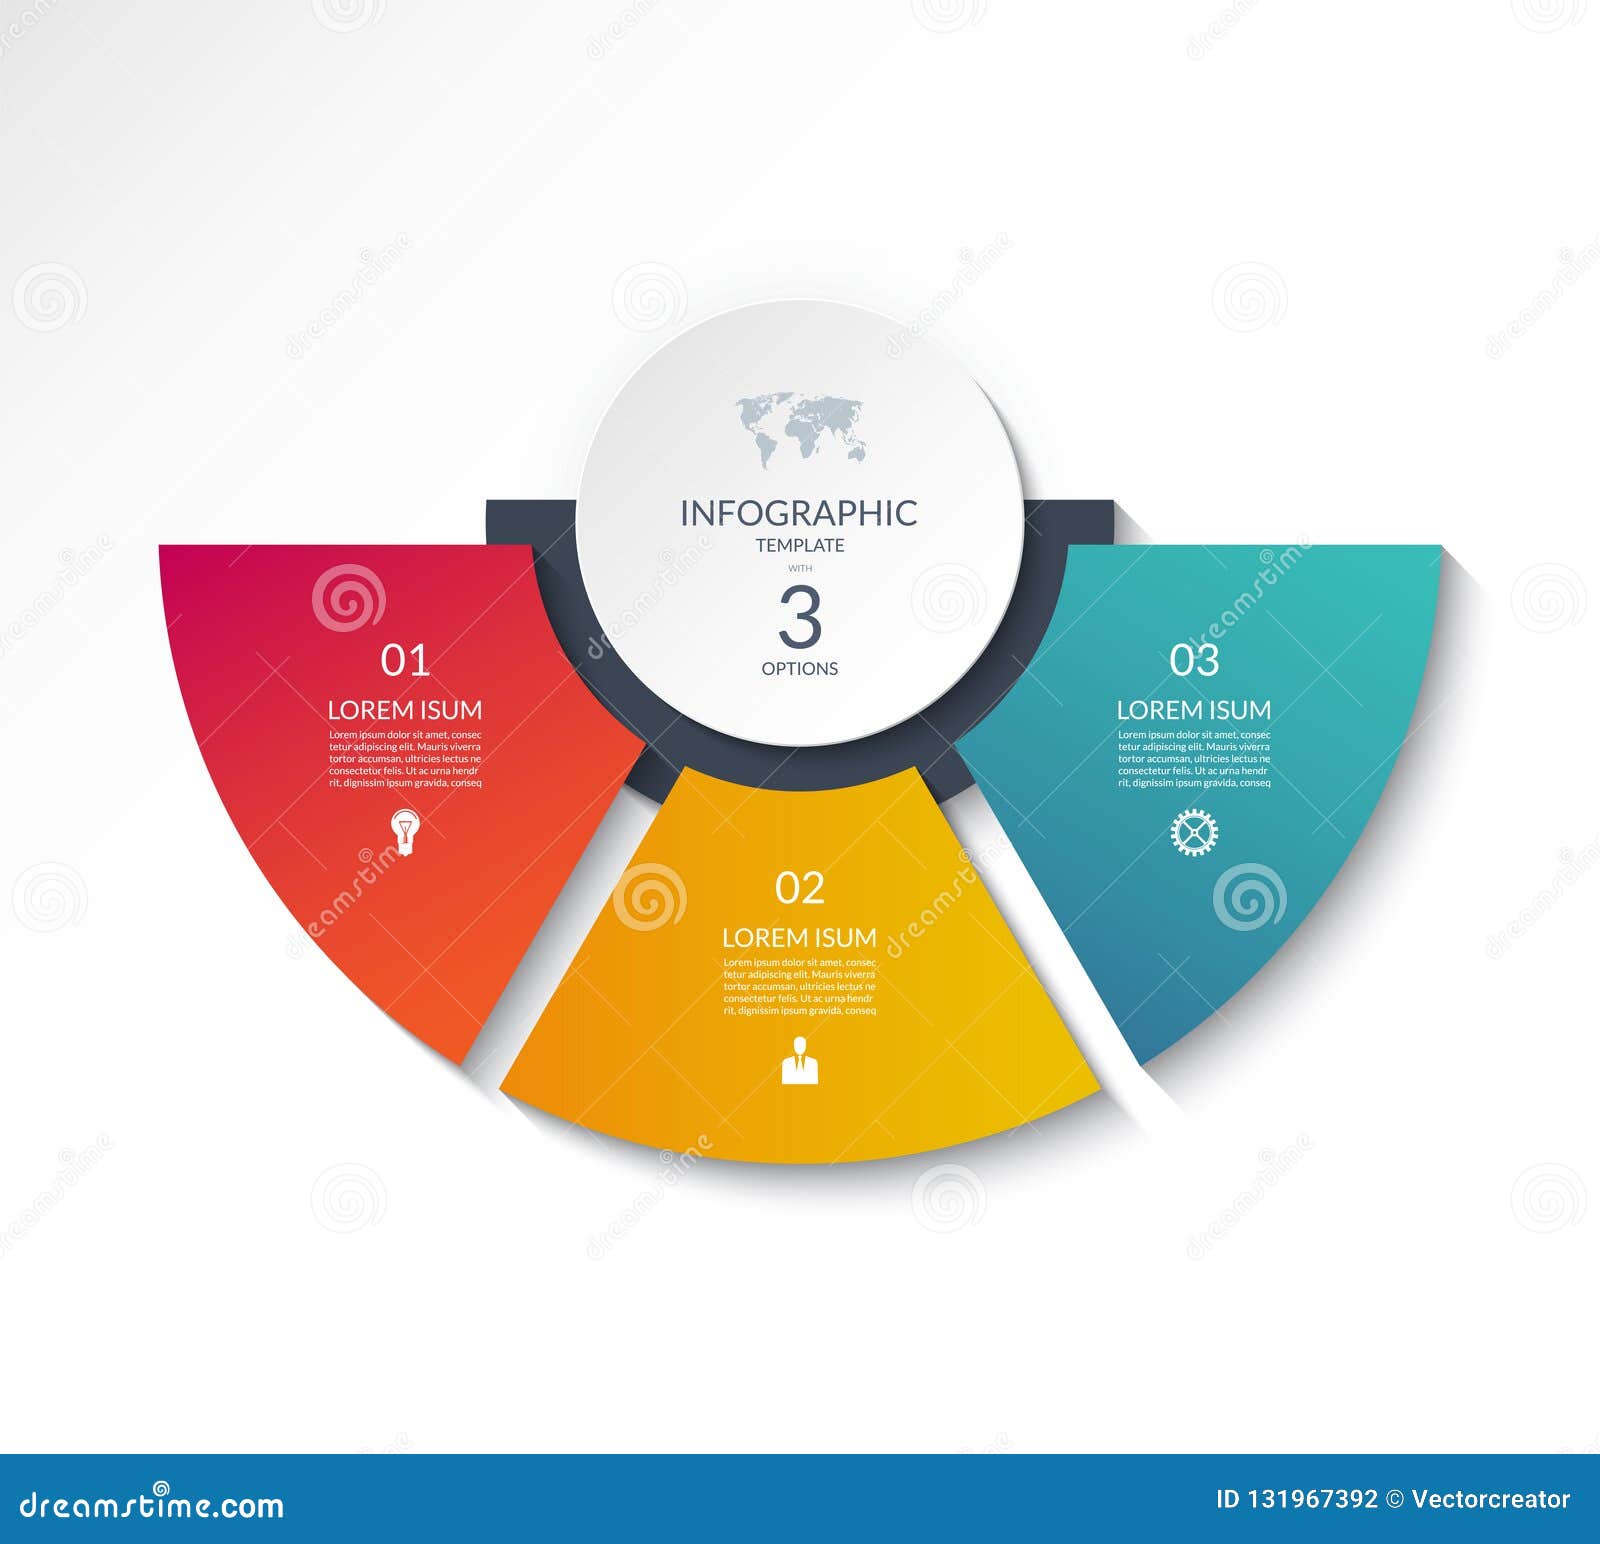 business infographic semi circle template with 3 options.